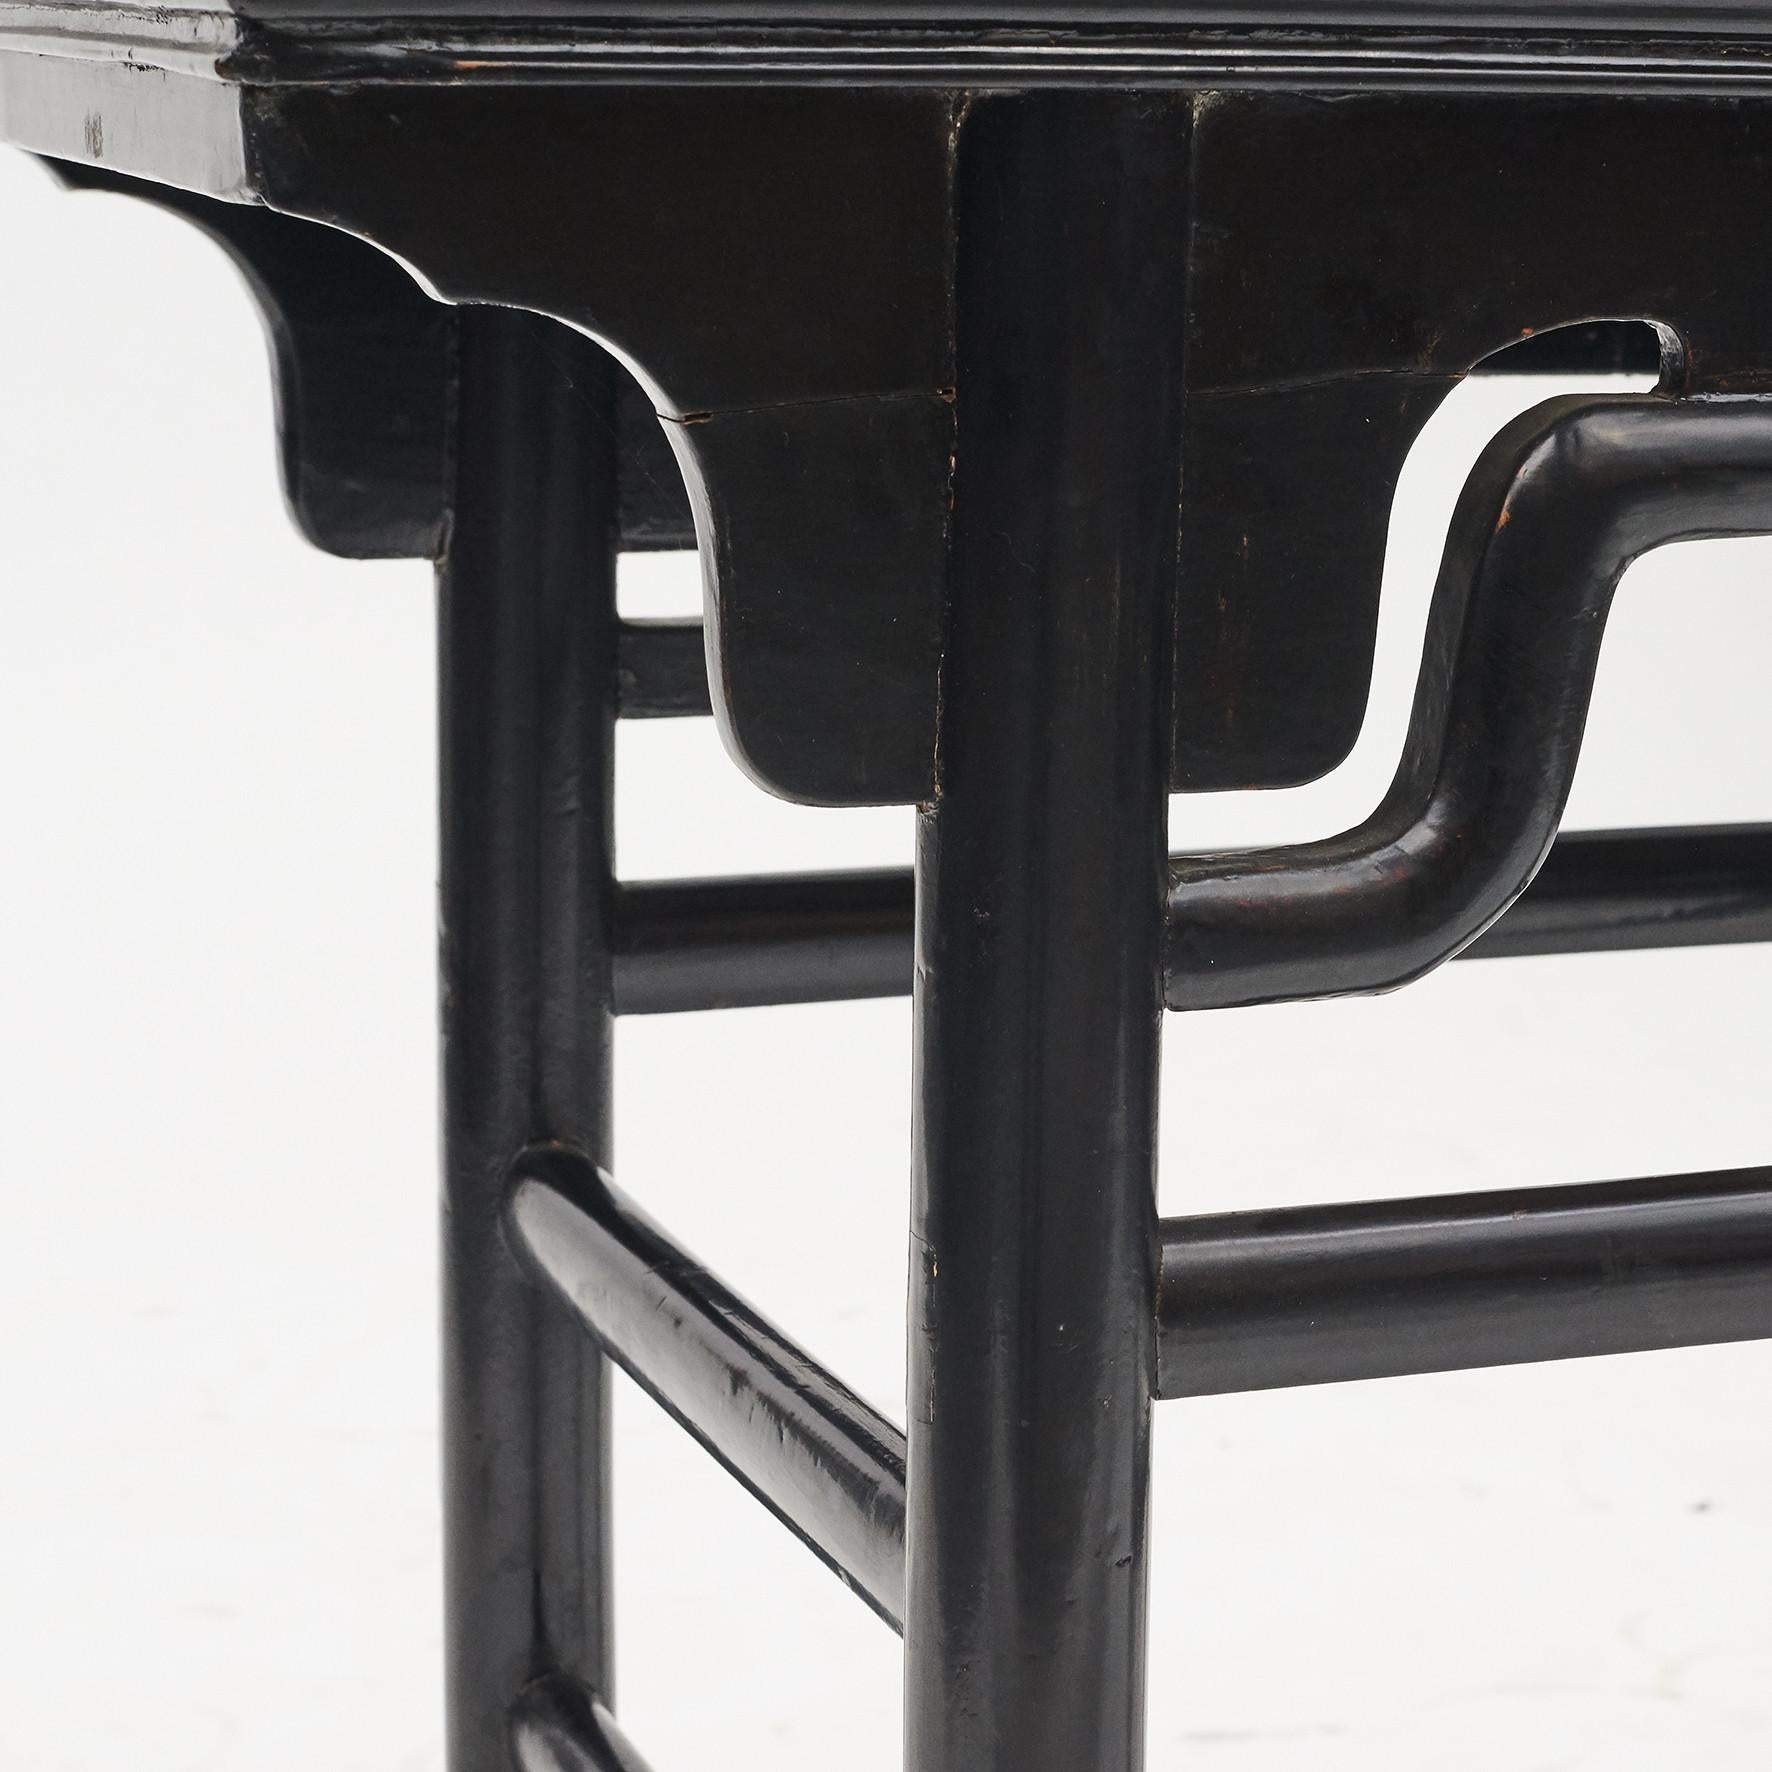 ming console table